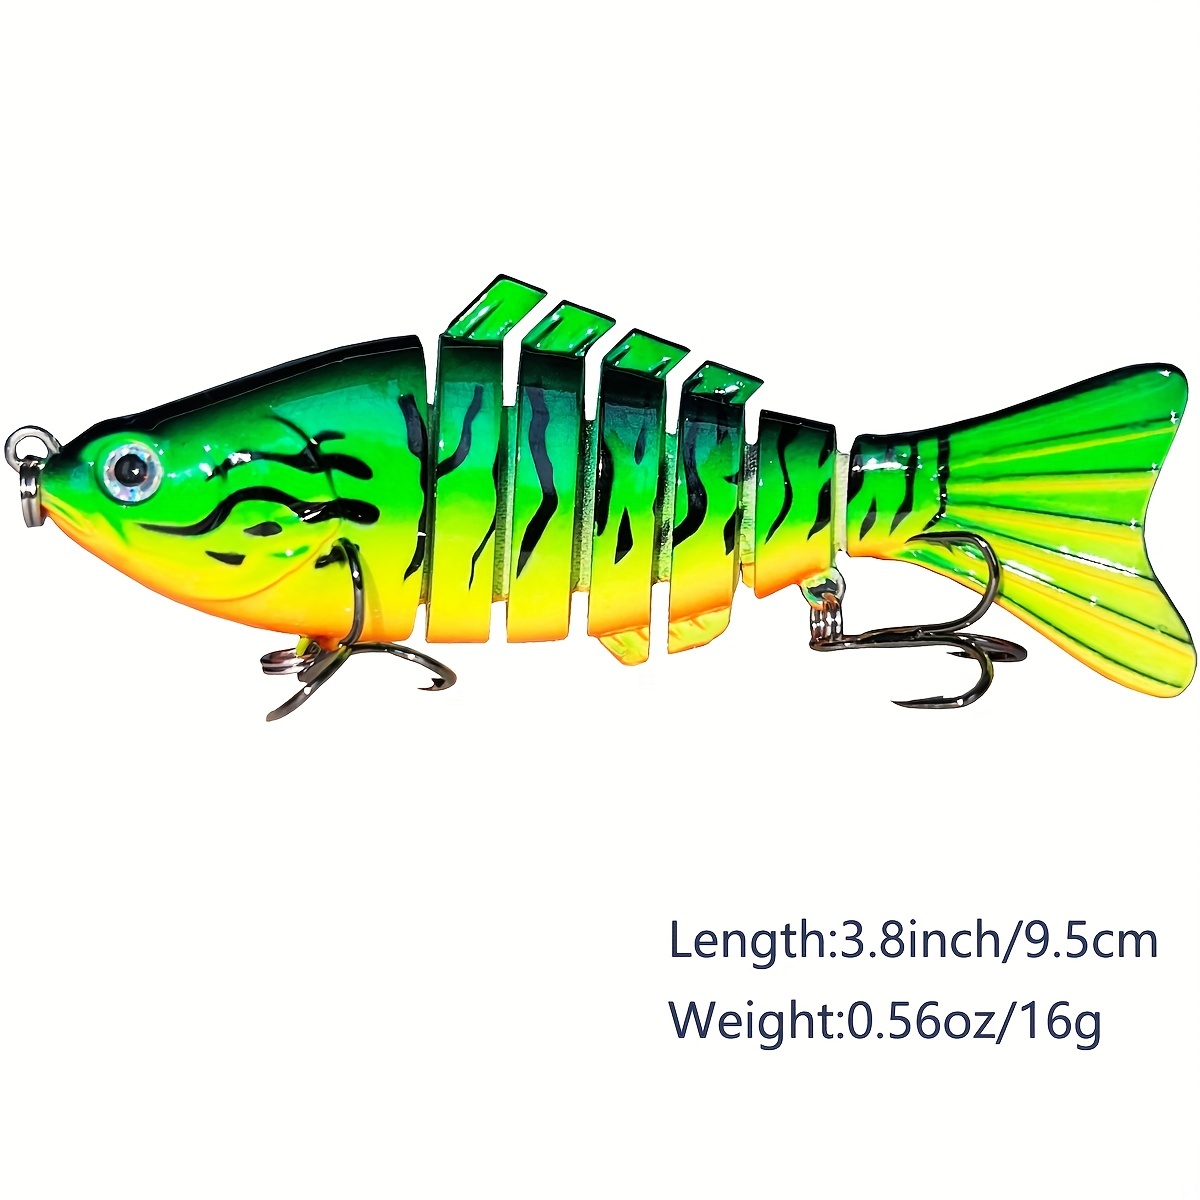  Sosoport Fishing Lures Saltwater Jigs Bass Lures Fishing Lures  Fish Lures Product Bait Fishing Bass Lures : Sports & Outdoors